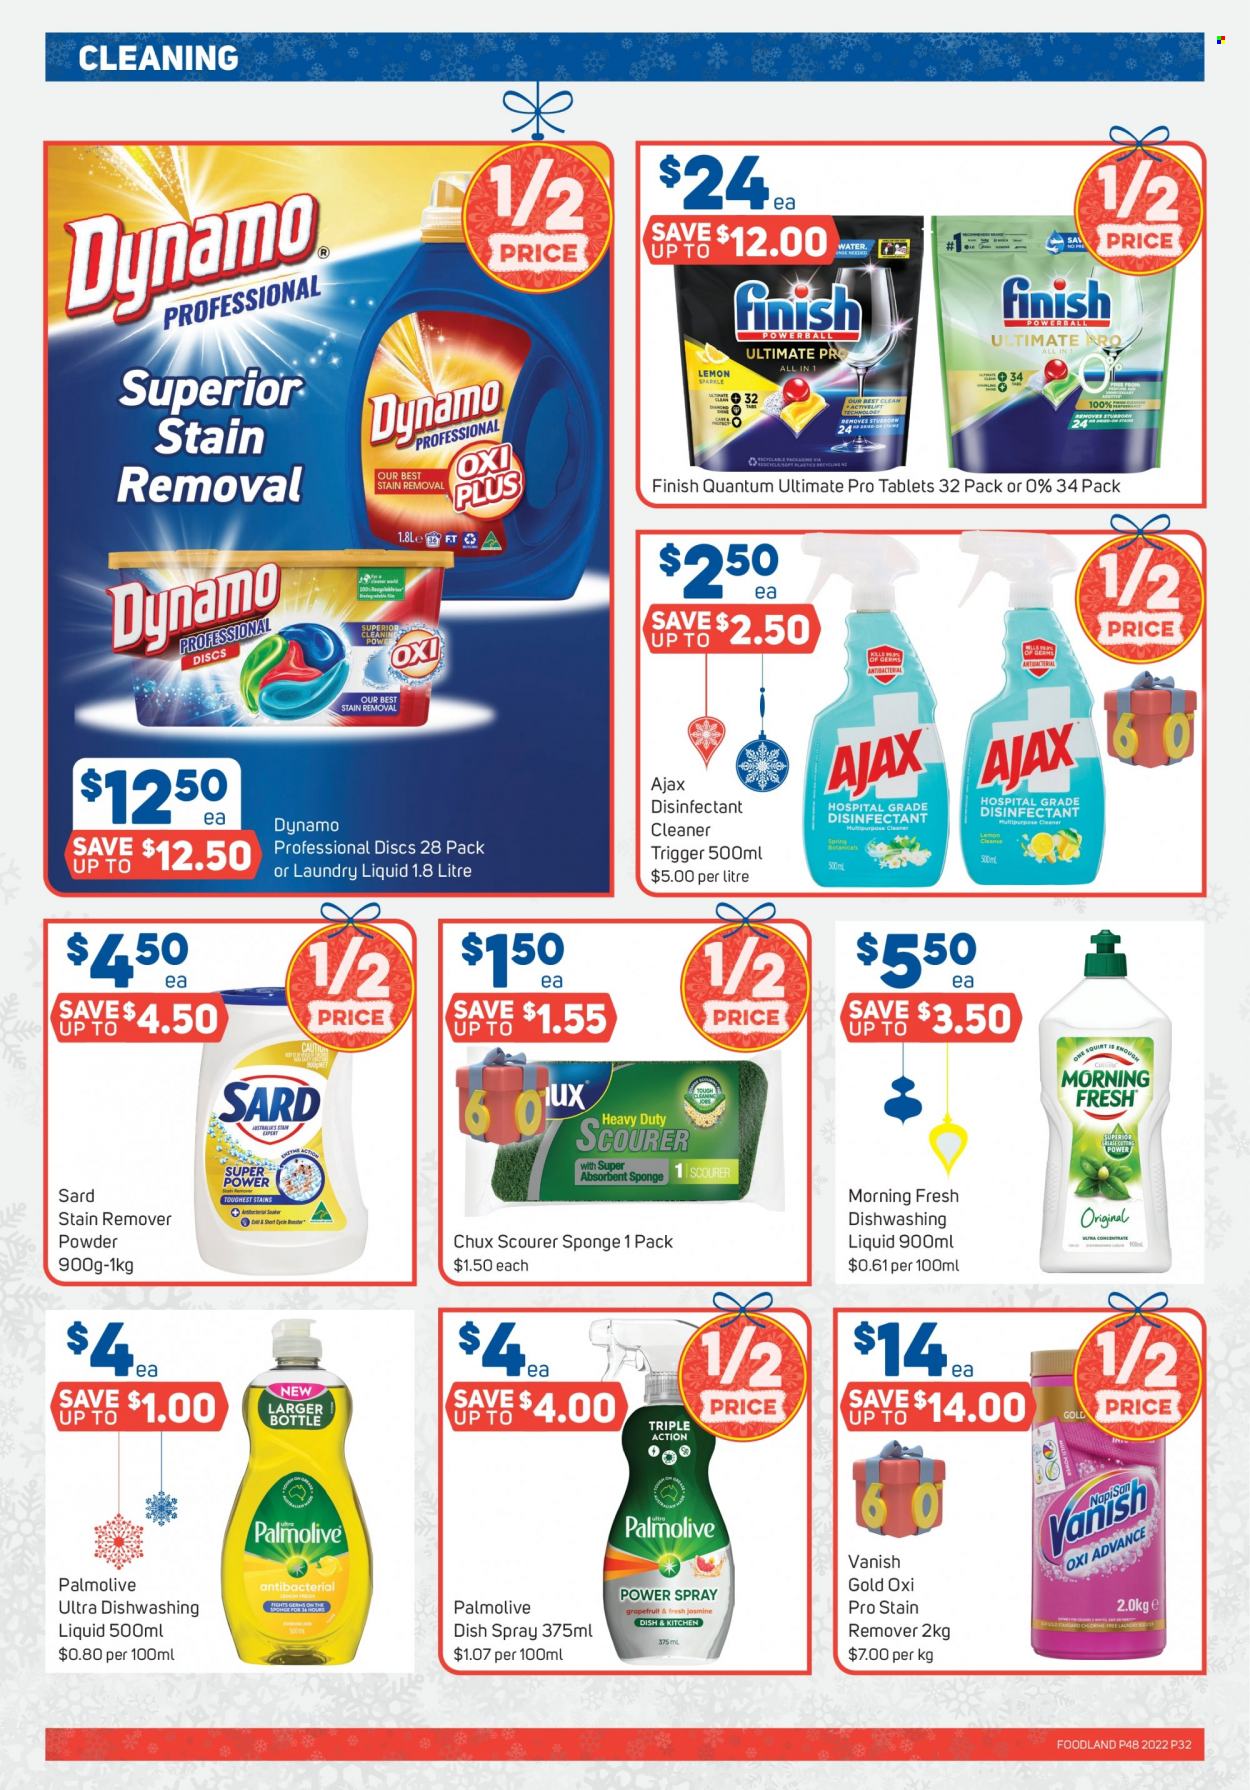 thumbnail - Foodland Catalogue - 30 Nov 2022 - 6 Dec 2022 - Sales products - grapefruits, cleaner, desinfection, stain remover, Vanish, Ajax, laundry detergent, dishwashing liquid, scourer, Finish Powerball, Finish Quantum Ultimate, Palmolive. Page 32.